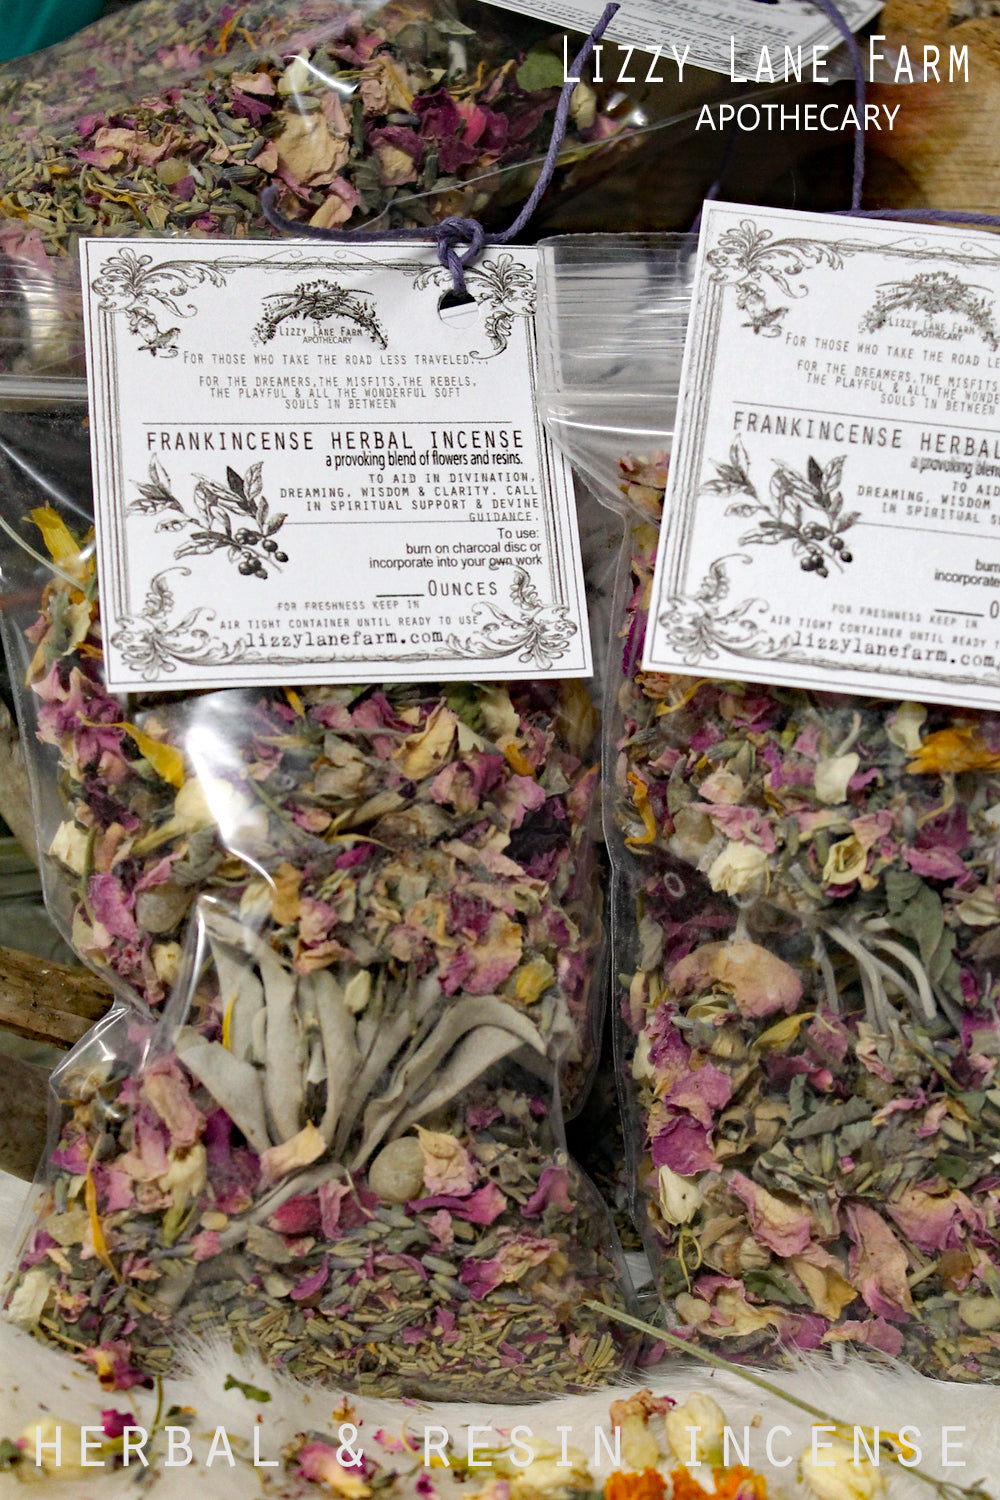 Frolic Herbal Incense - Lizzy Lane Farm Apothecary